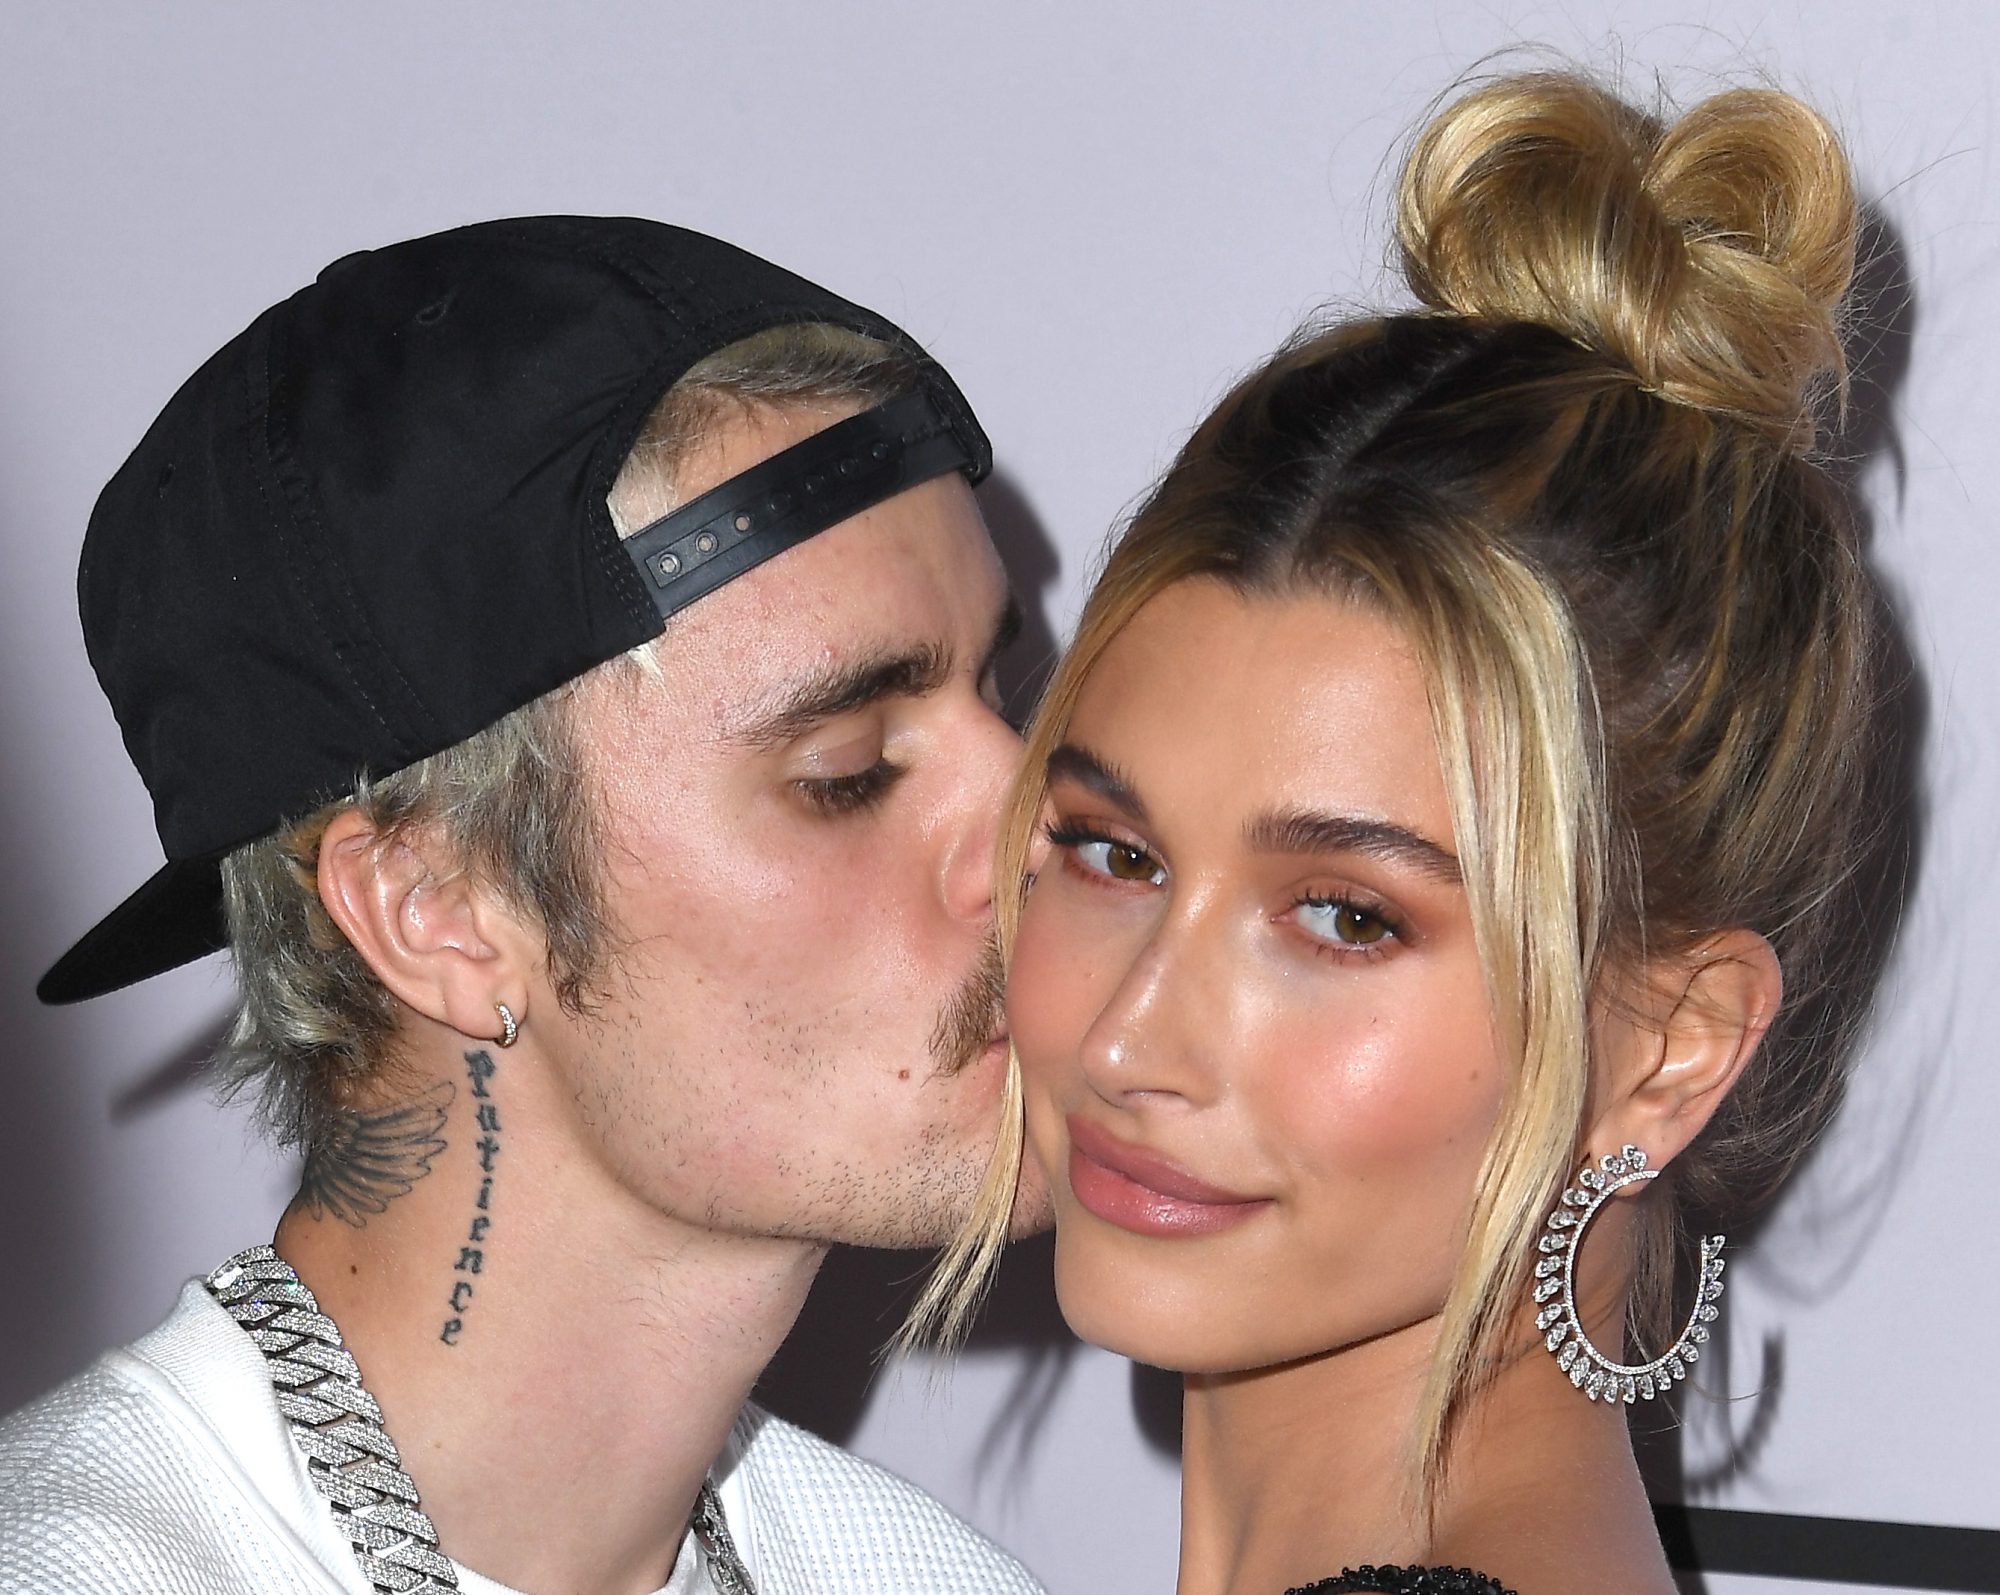 Hailey Baldwin's New Tattoo Looks Like Selena Gomez's Ring | In Touch Weekly